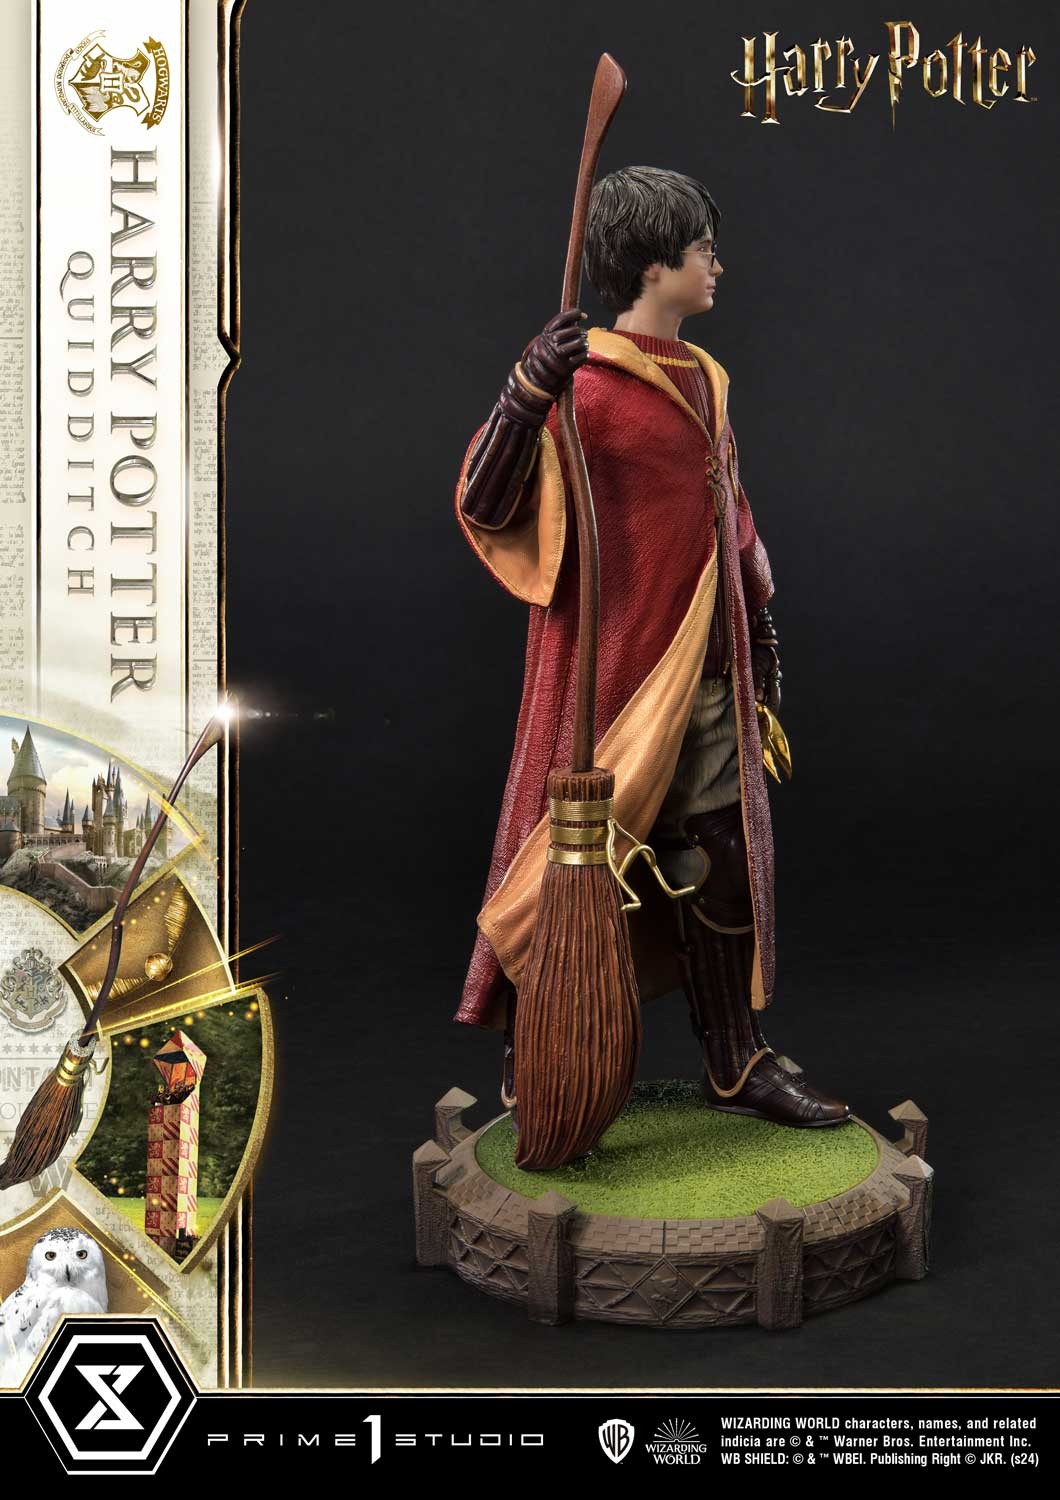 Harry Potter (Quidditch Edition) (Prototype Shown) View 11